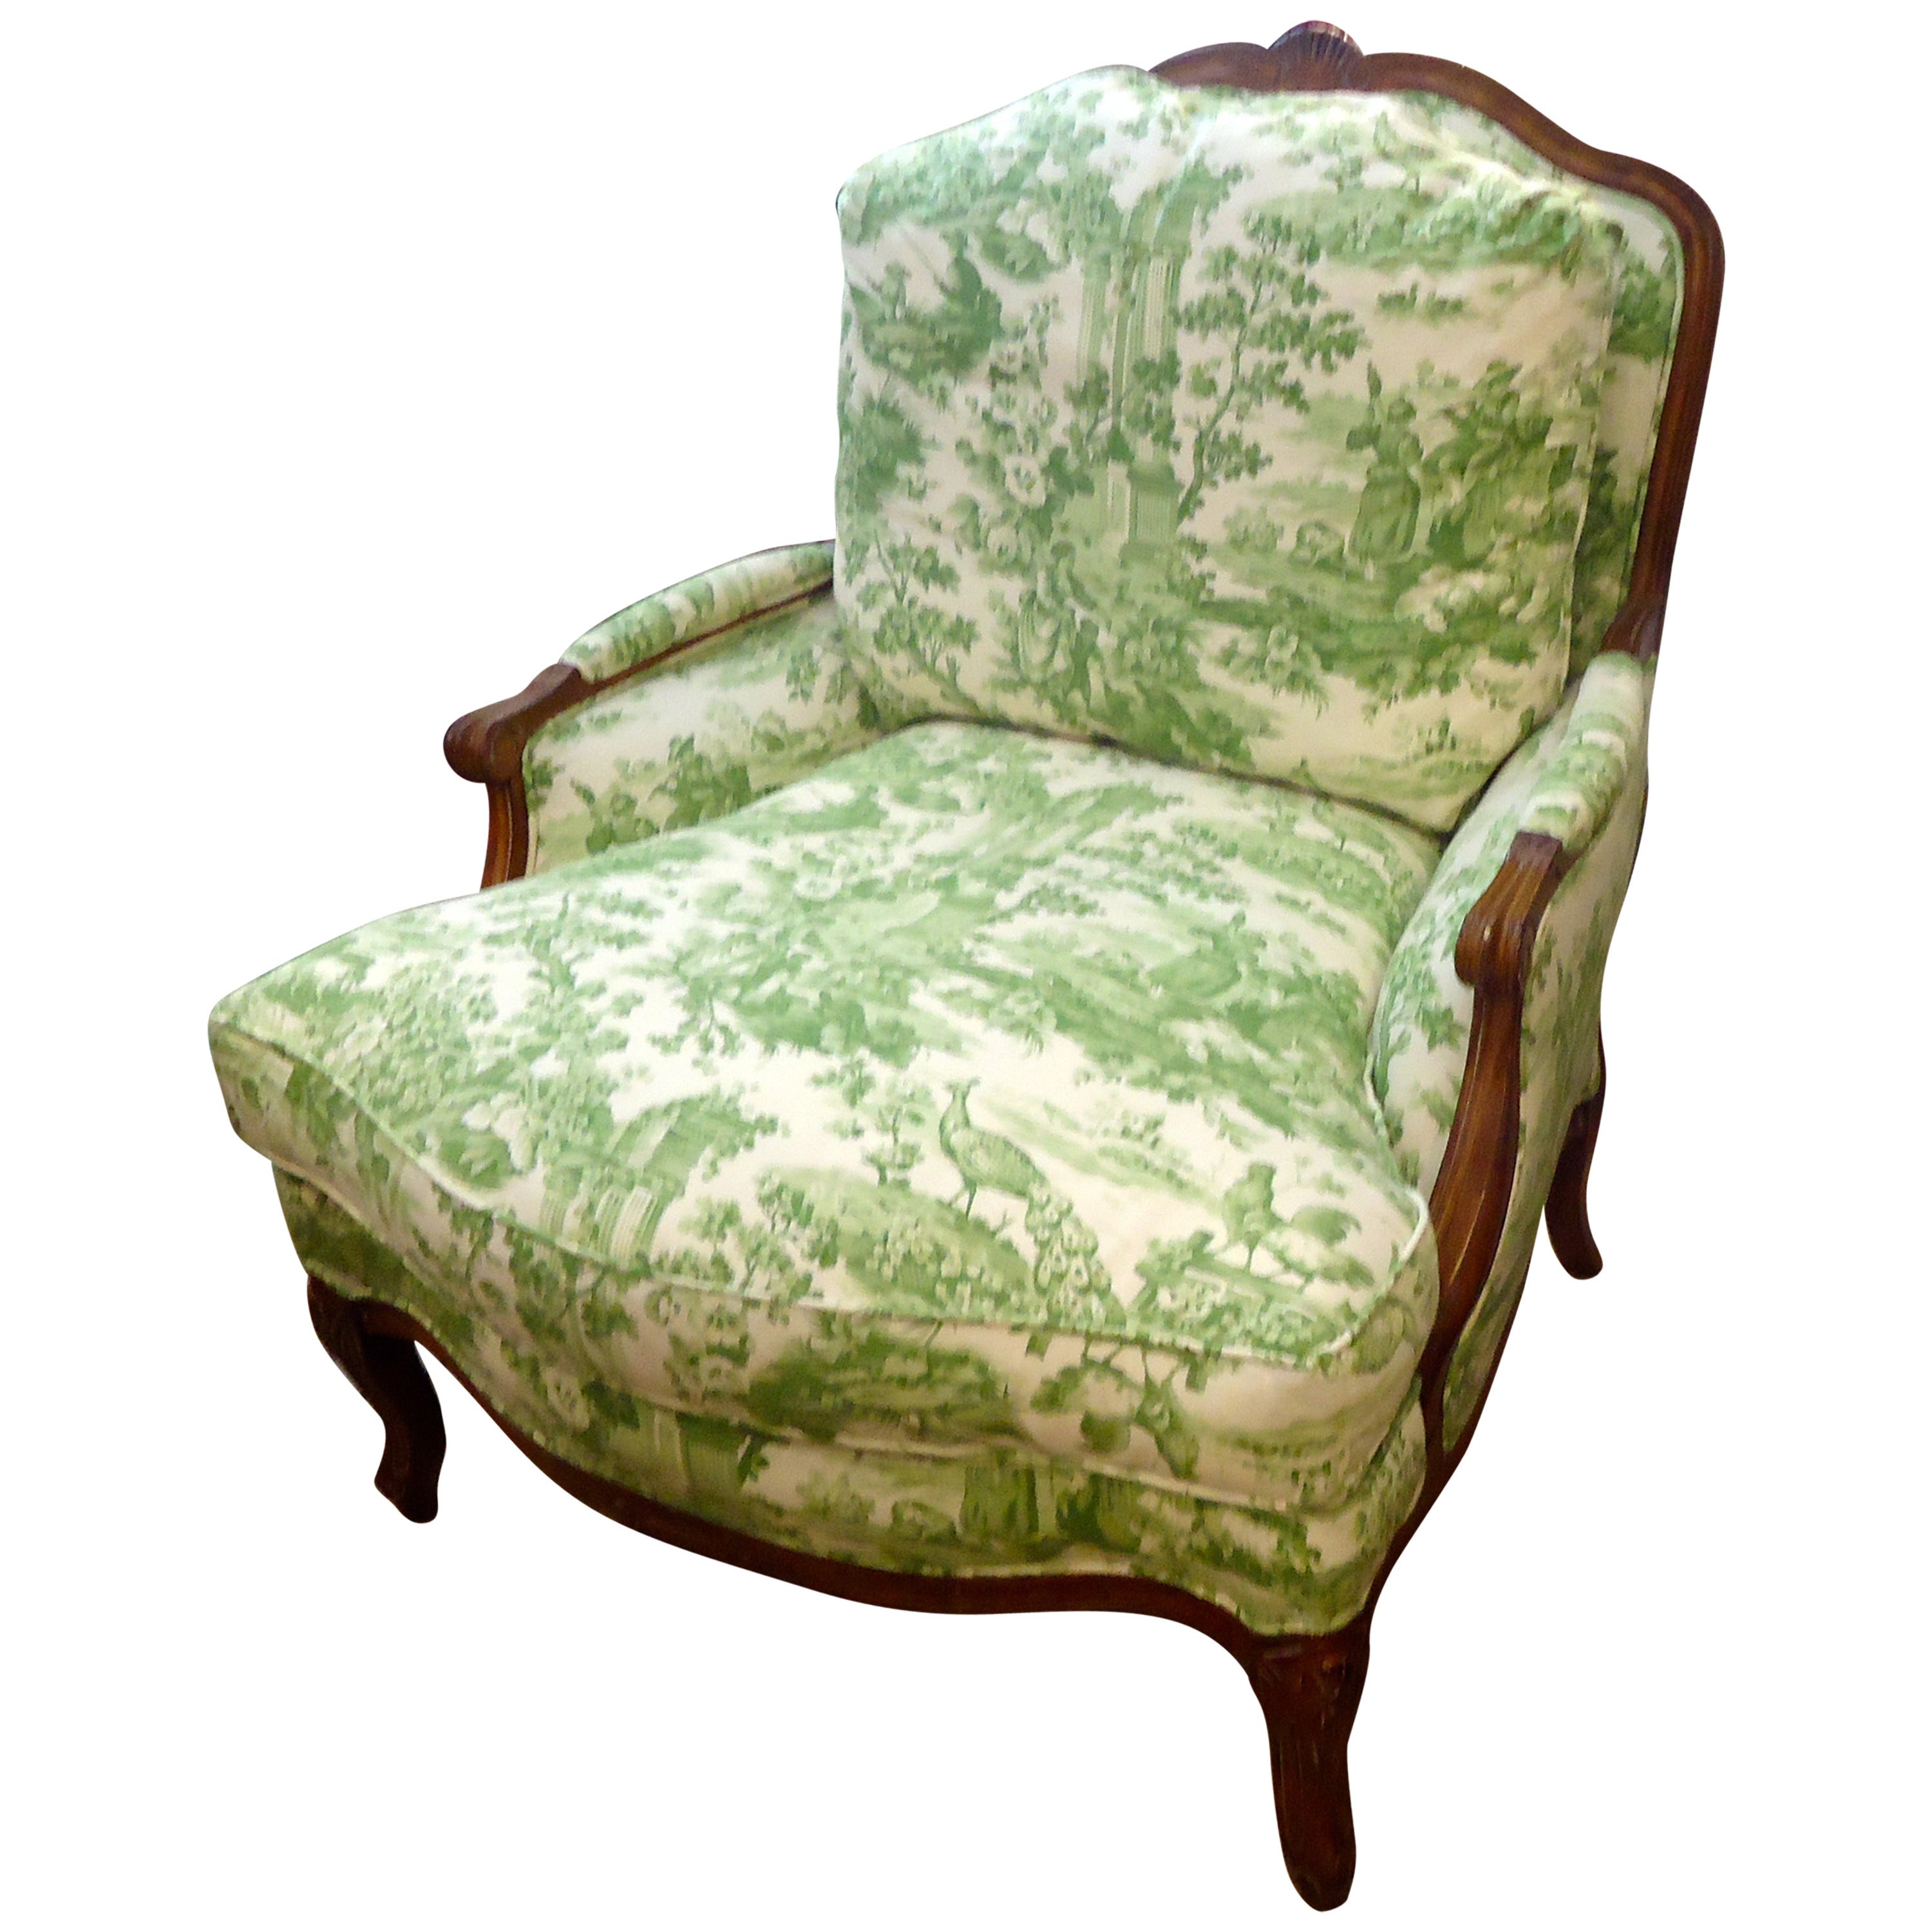 Large Comfy French Bergere Lounge Chair Upholstered in Toile